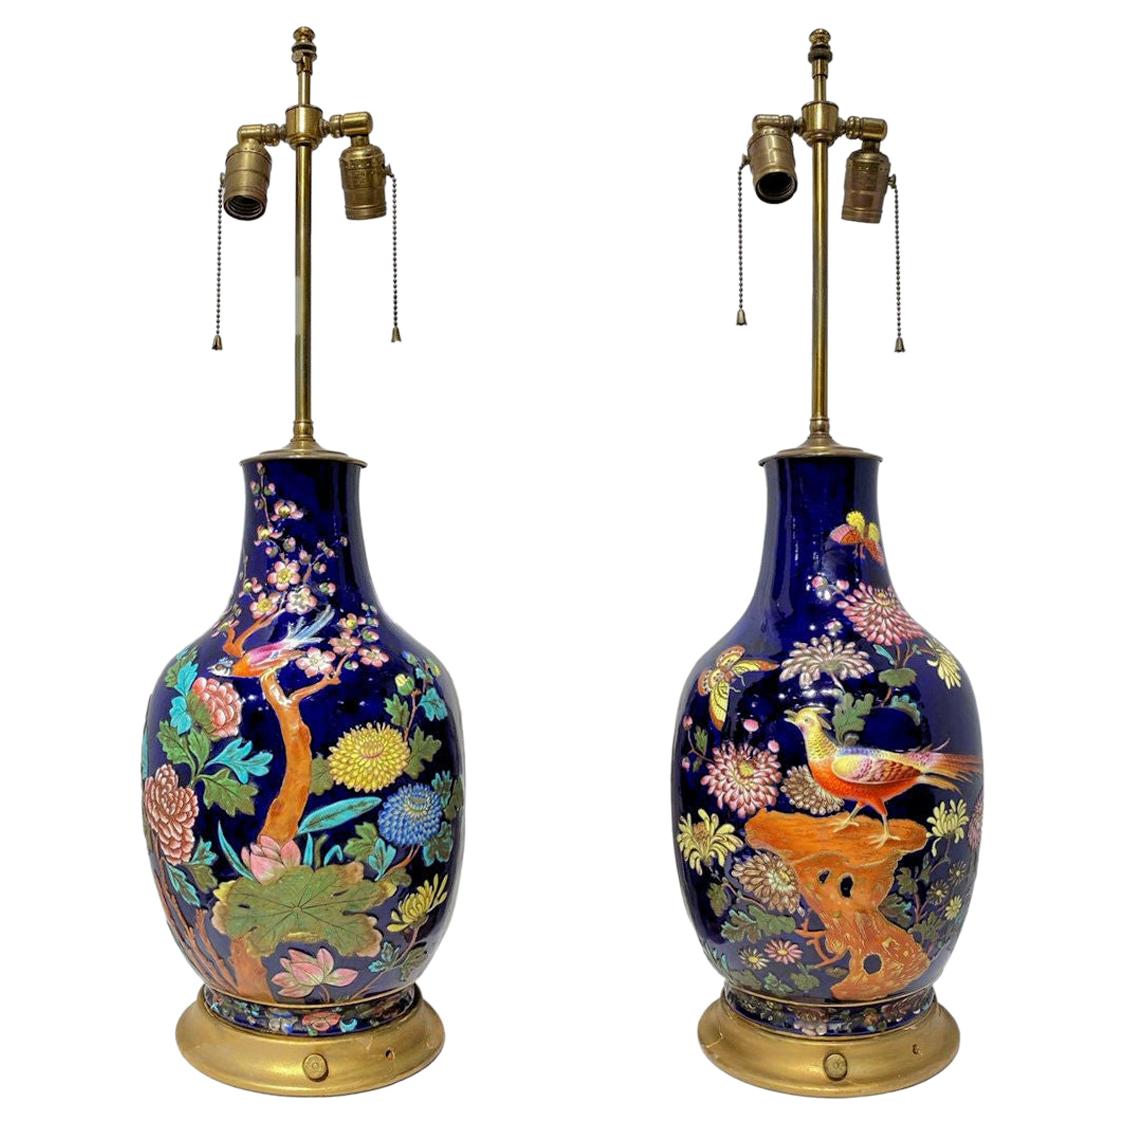 Pair Colorful Enameled Porcelain Table Lamps with Bird and Flowers Motifs